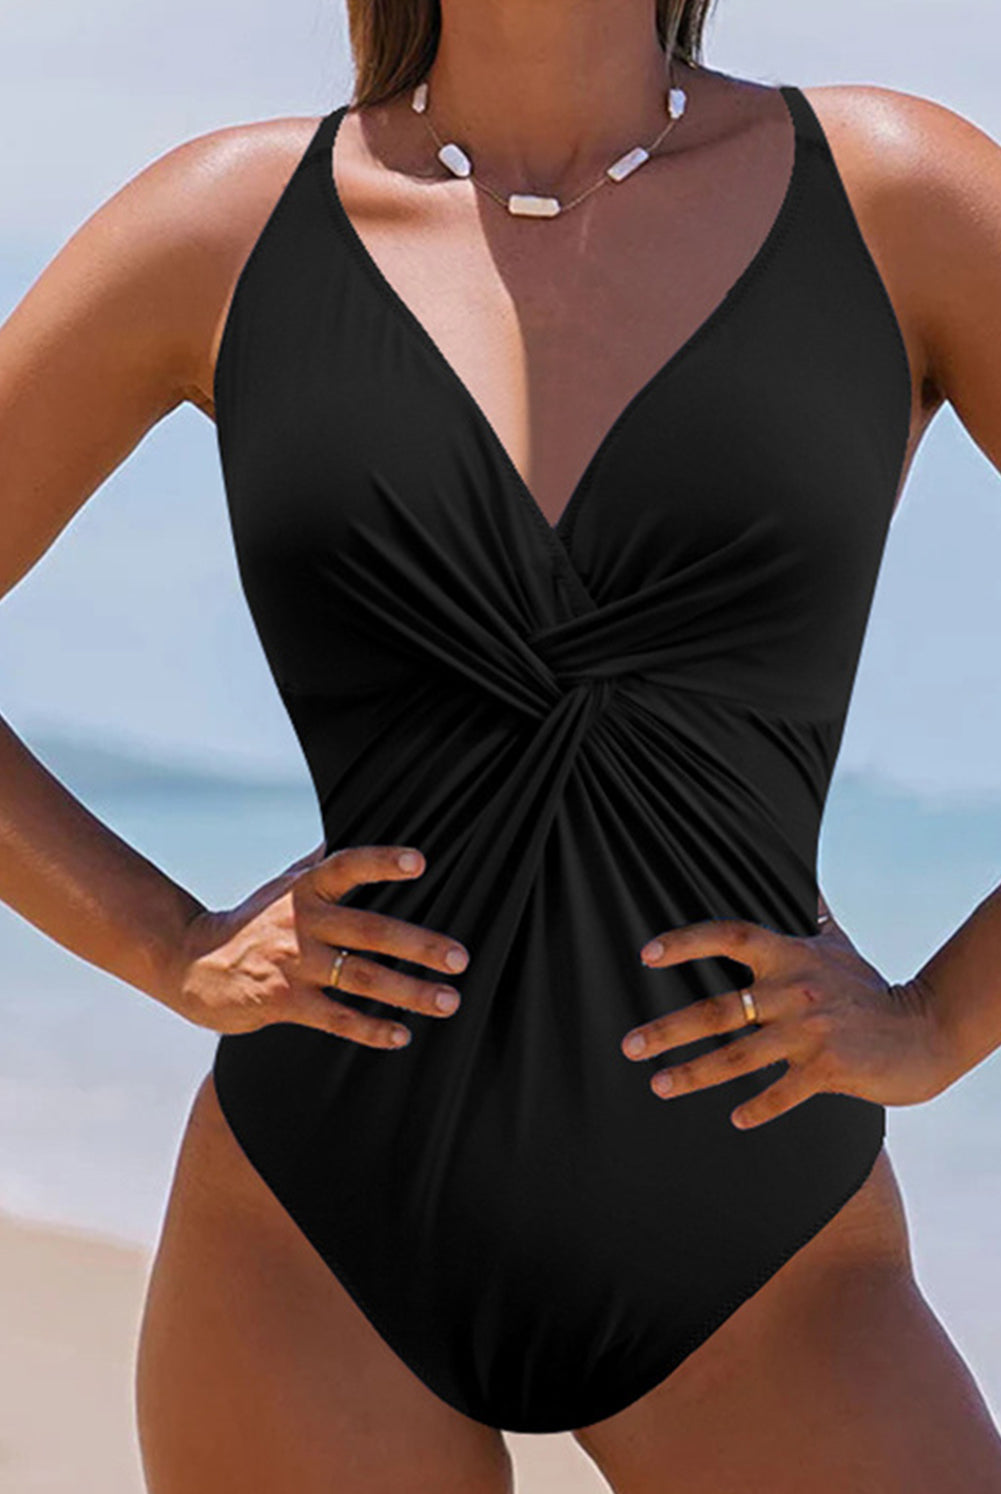 Elegant V-Neck One-Piece Swimsuit | Full Coverage with a Twist | GemThreads Boutique - GemThreads Boutique Elegant V-Neck One-Piece Swimsuit | Full Coverage with a Twist | GemThreads Boutique